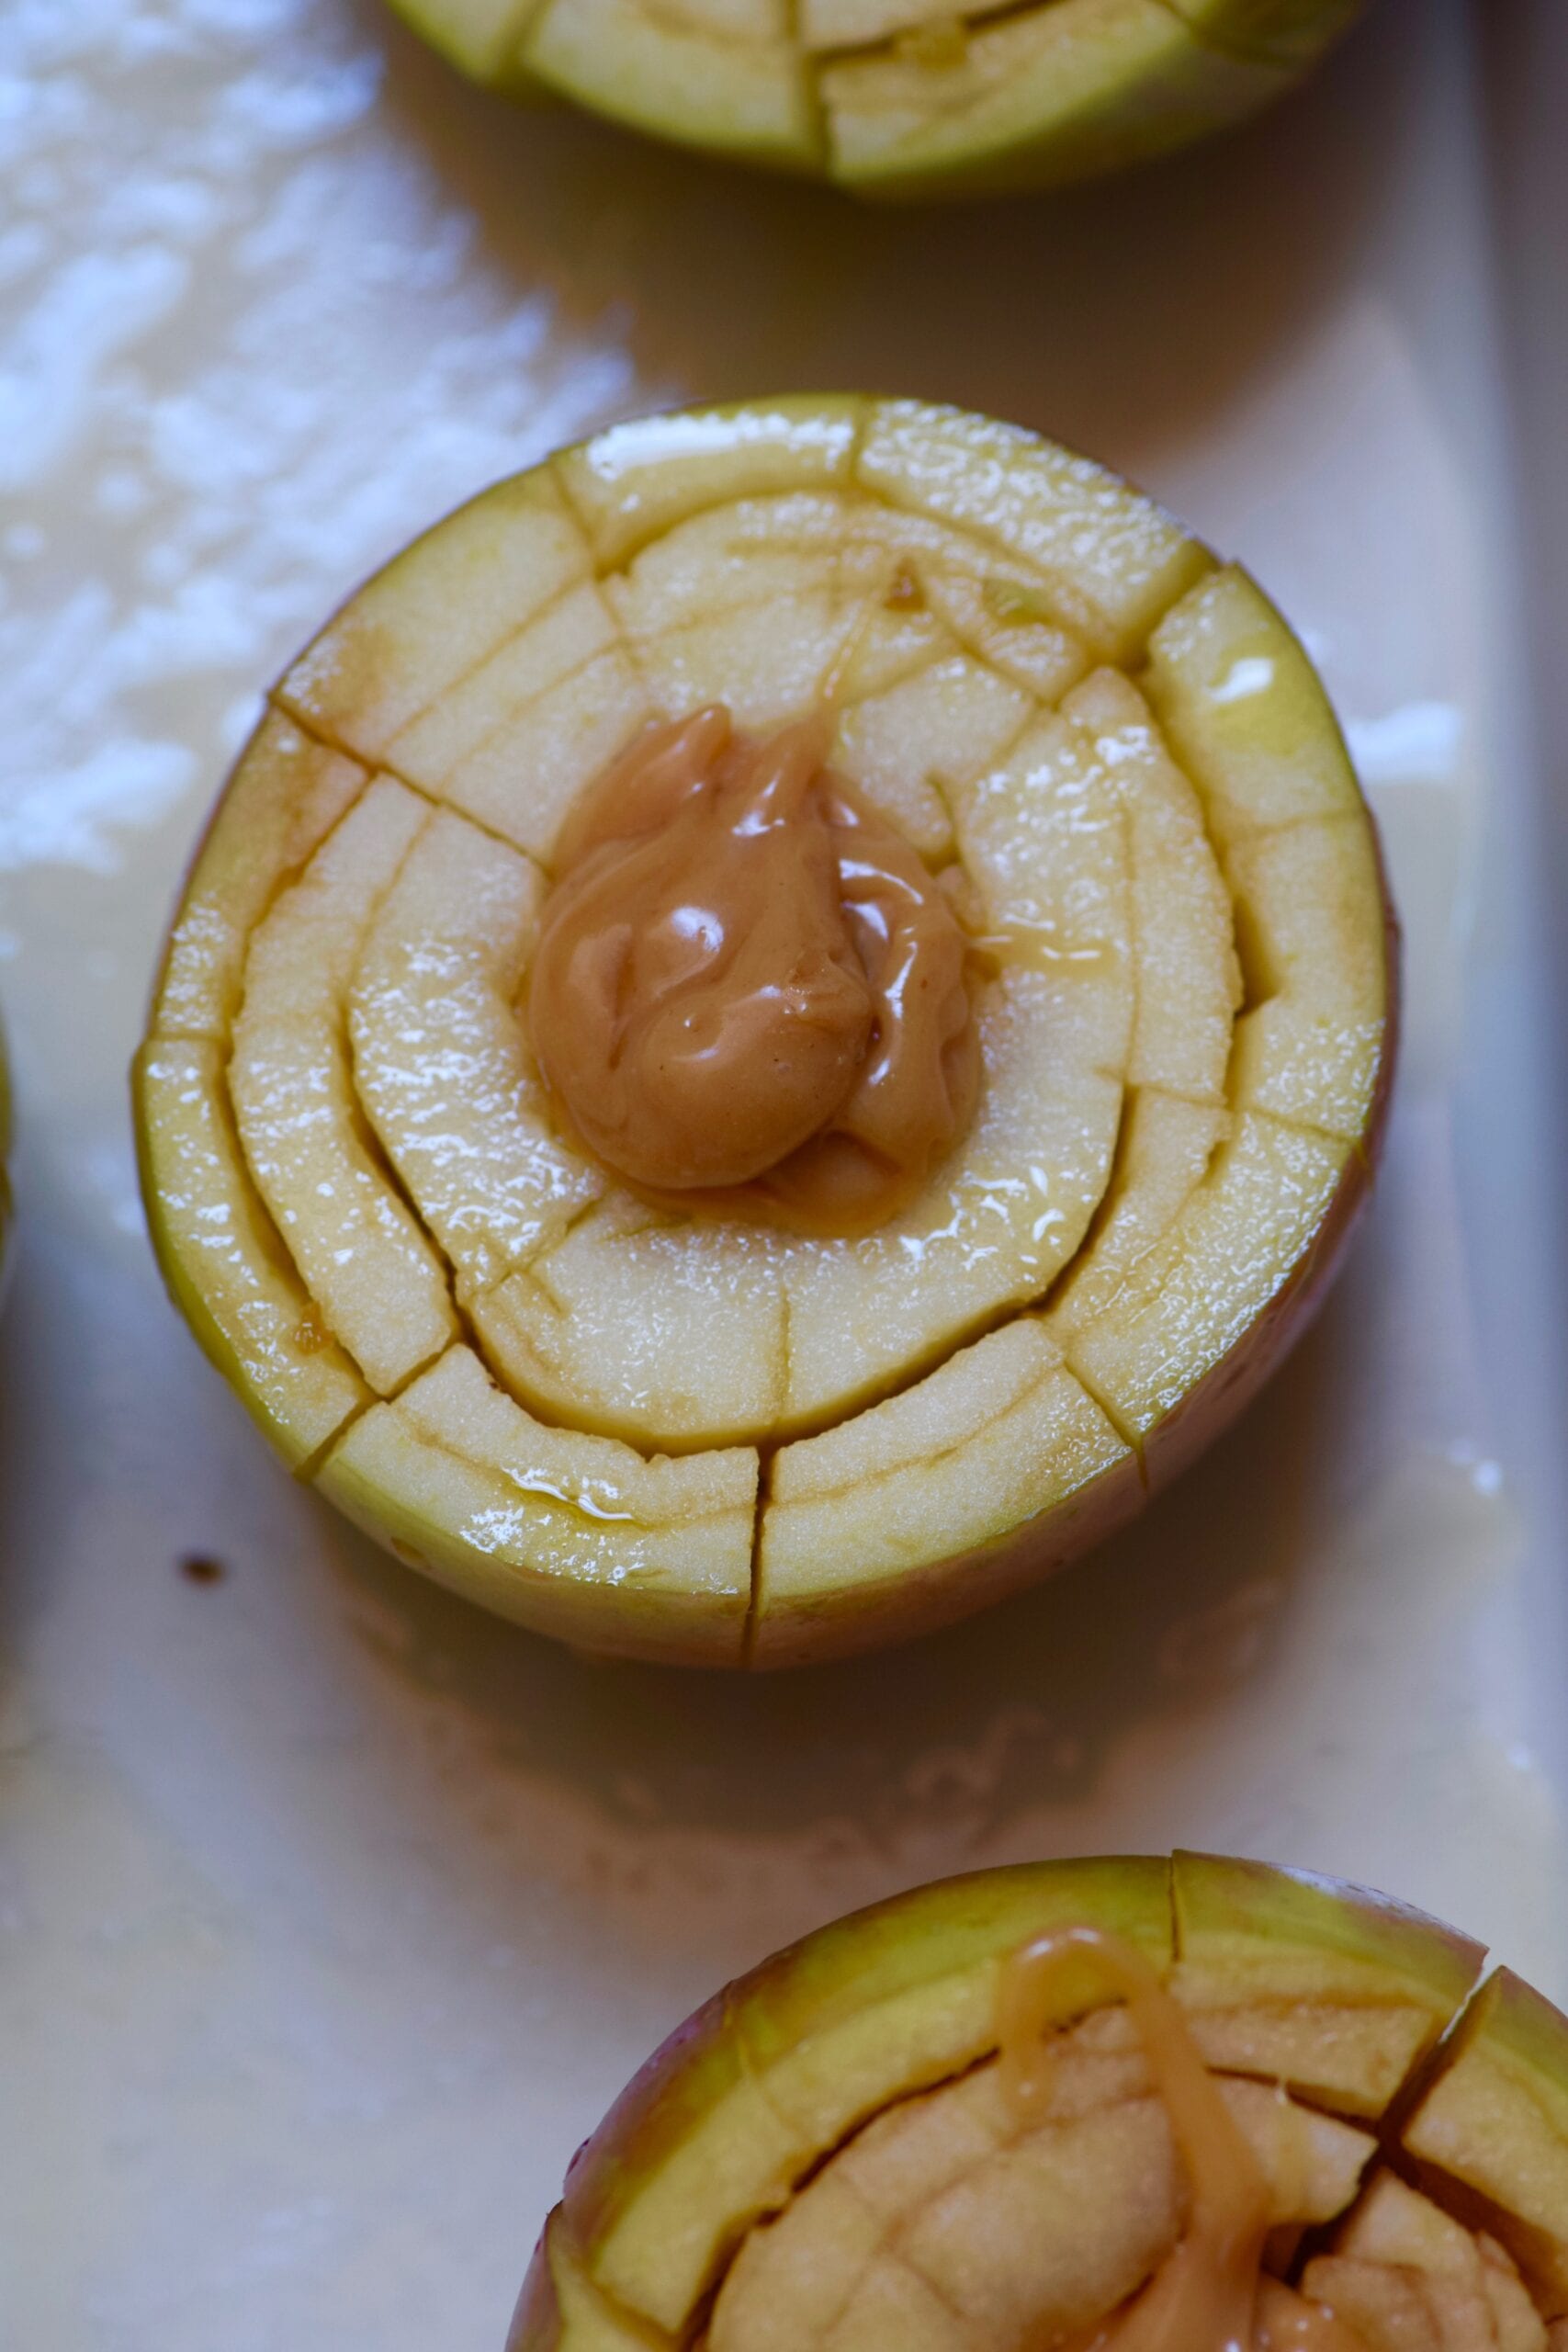 Filling each apple with caramel filling before baking